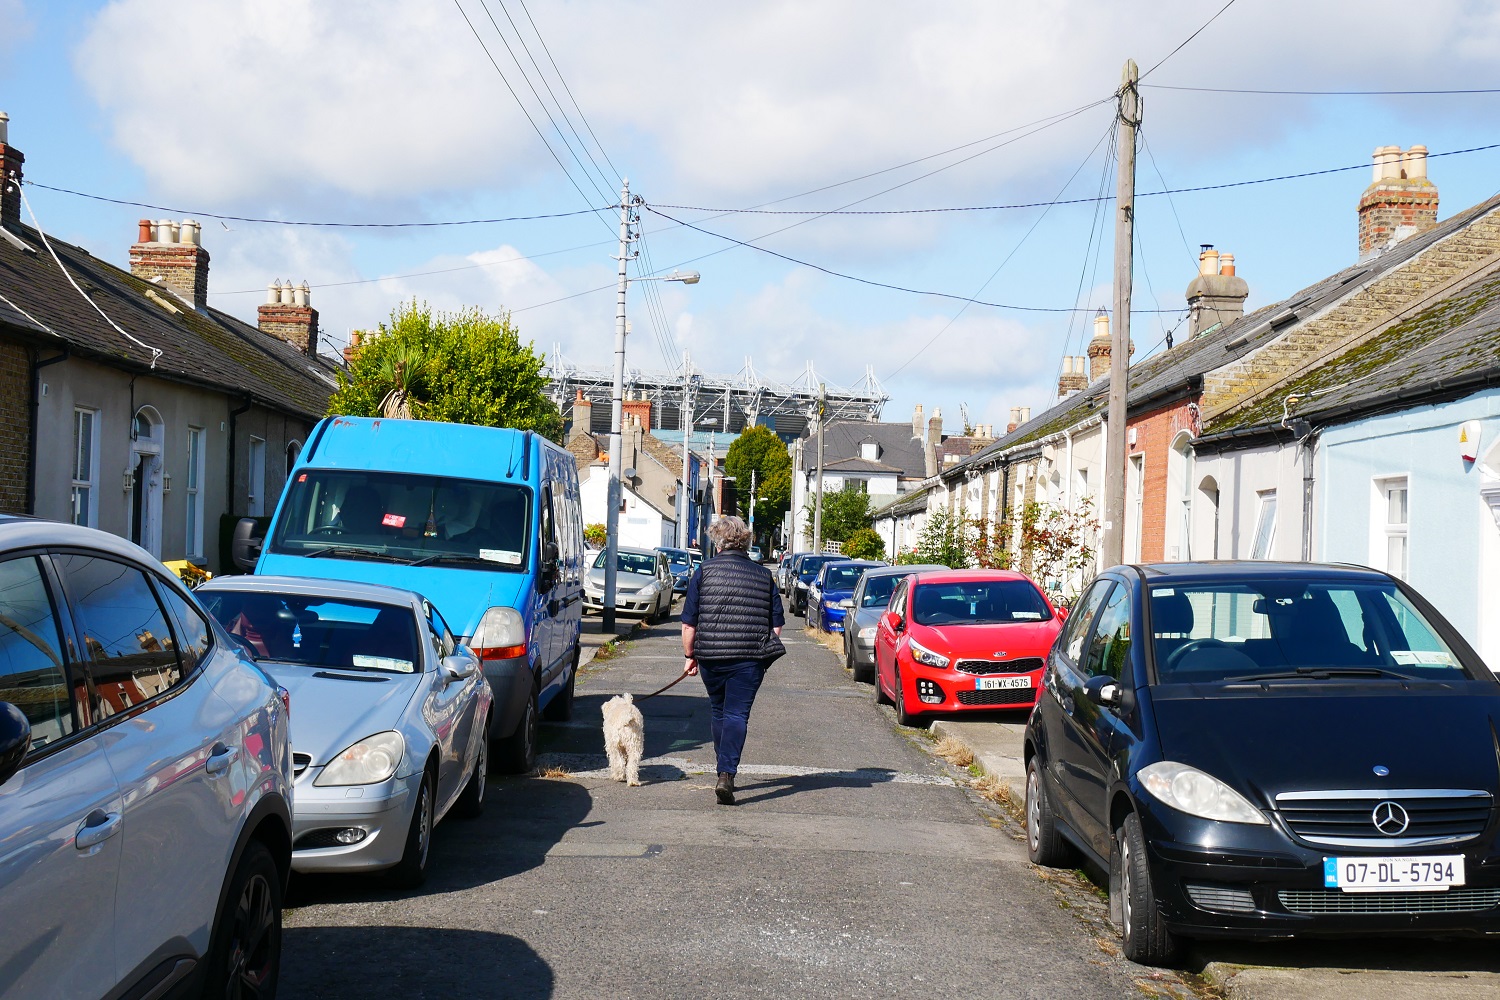 With Dublin City Council’s current parking-enforcement contract with DSPS due to end before long, some councillors have called for a new approach.